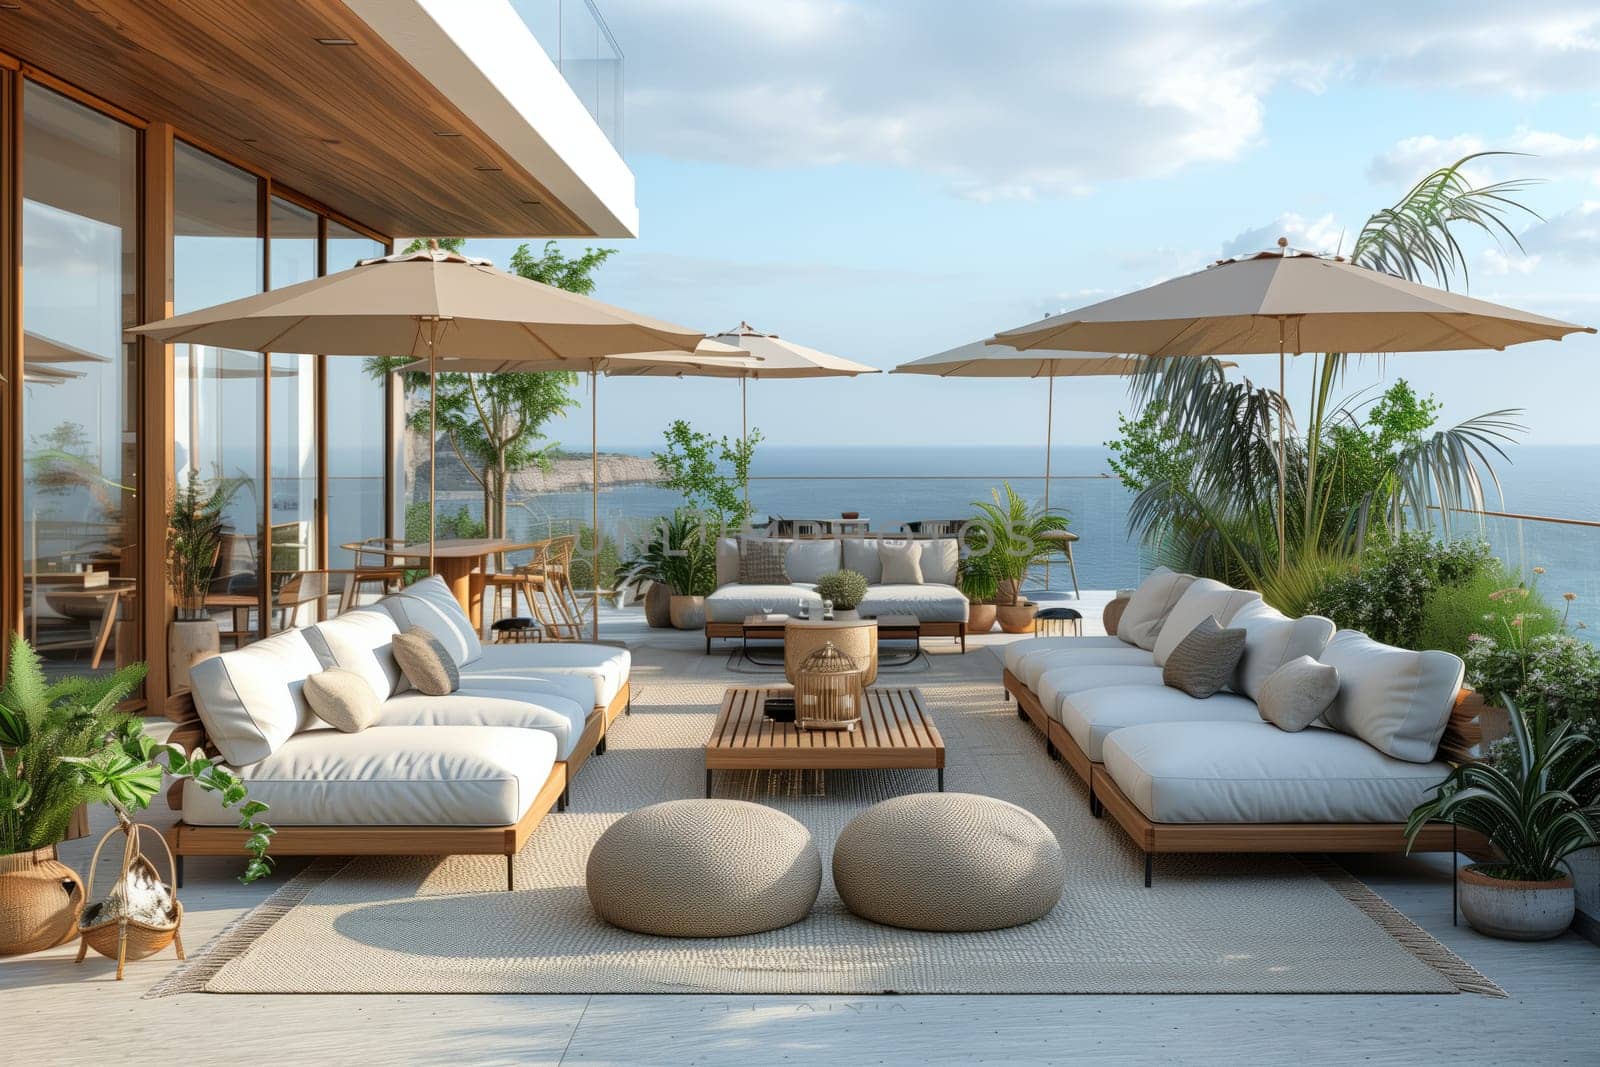 A waterfront patio adorned with numerous furniture, umbrellas, and plants, offering stunning views of the ocean. The perfect spot to relax and enjoy the beauty of nature